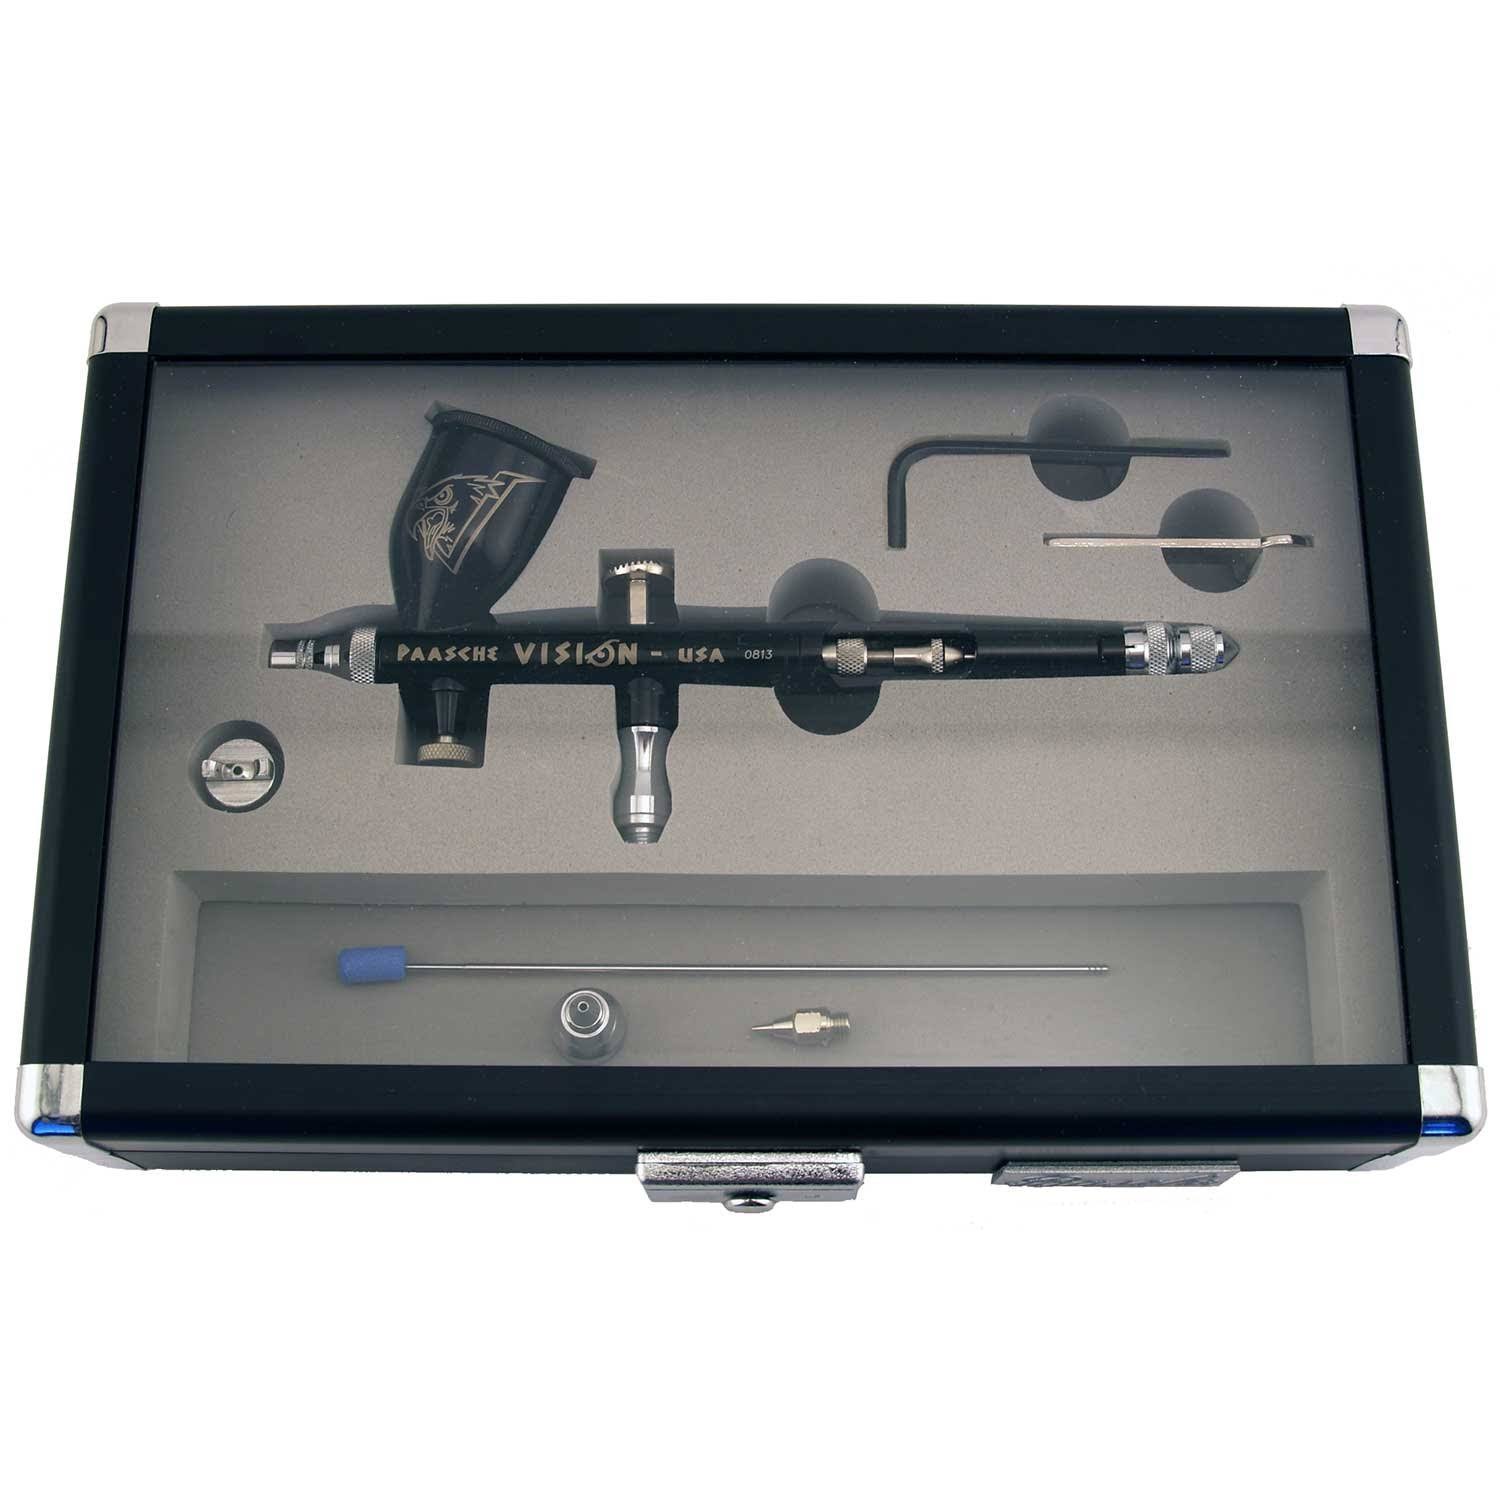 Paasche Airbrush Vision Gravity Feed Double Action Airbrush Set